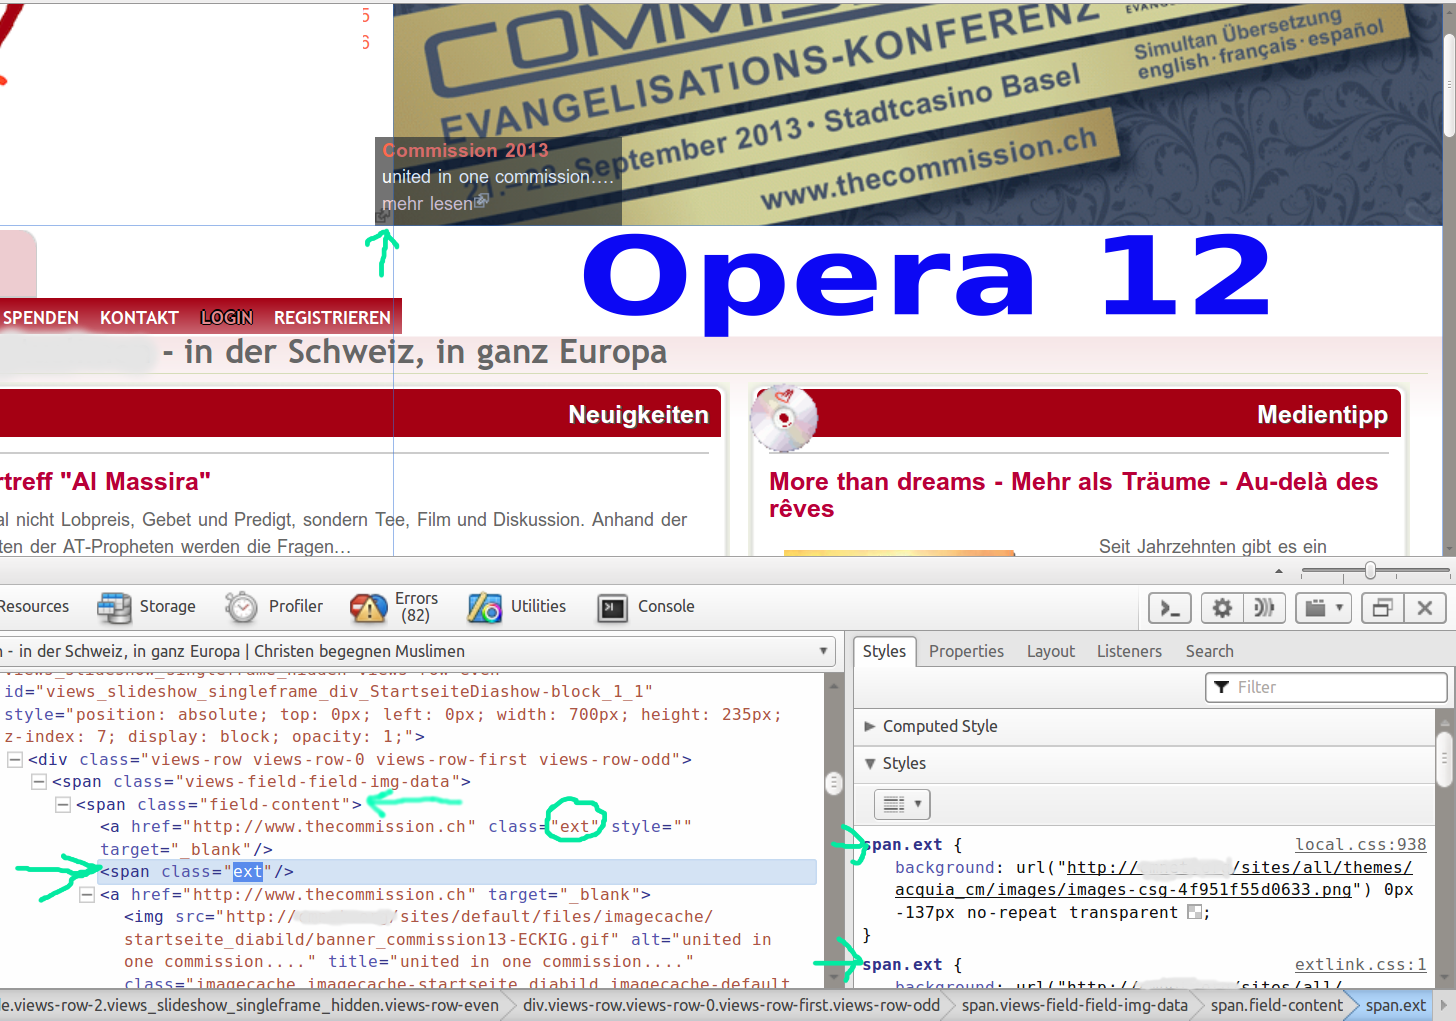 46-External_links_icon_shows_in_Opera_12.png